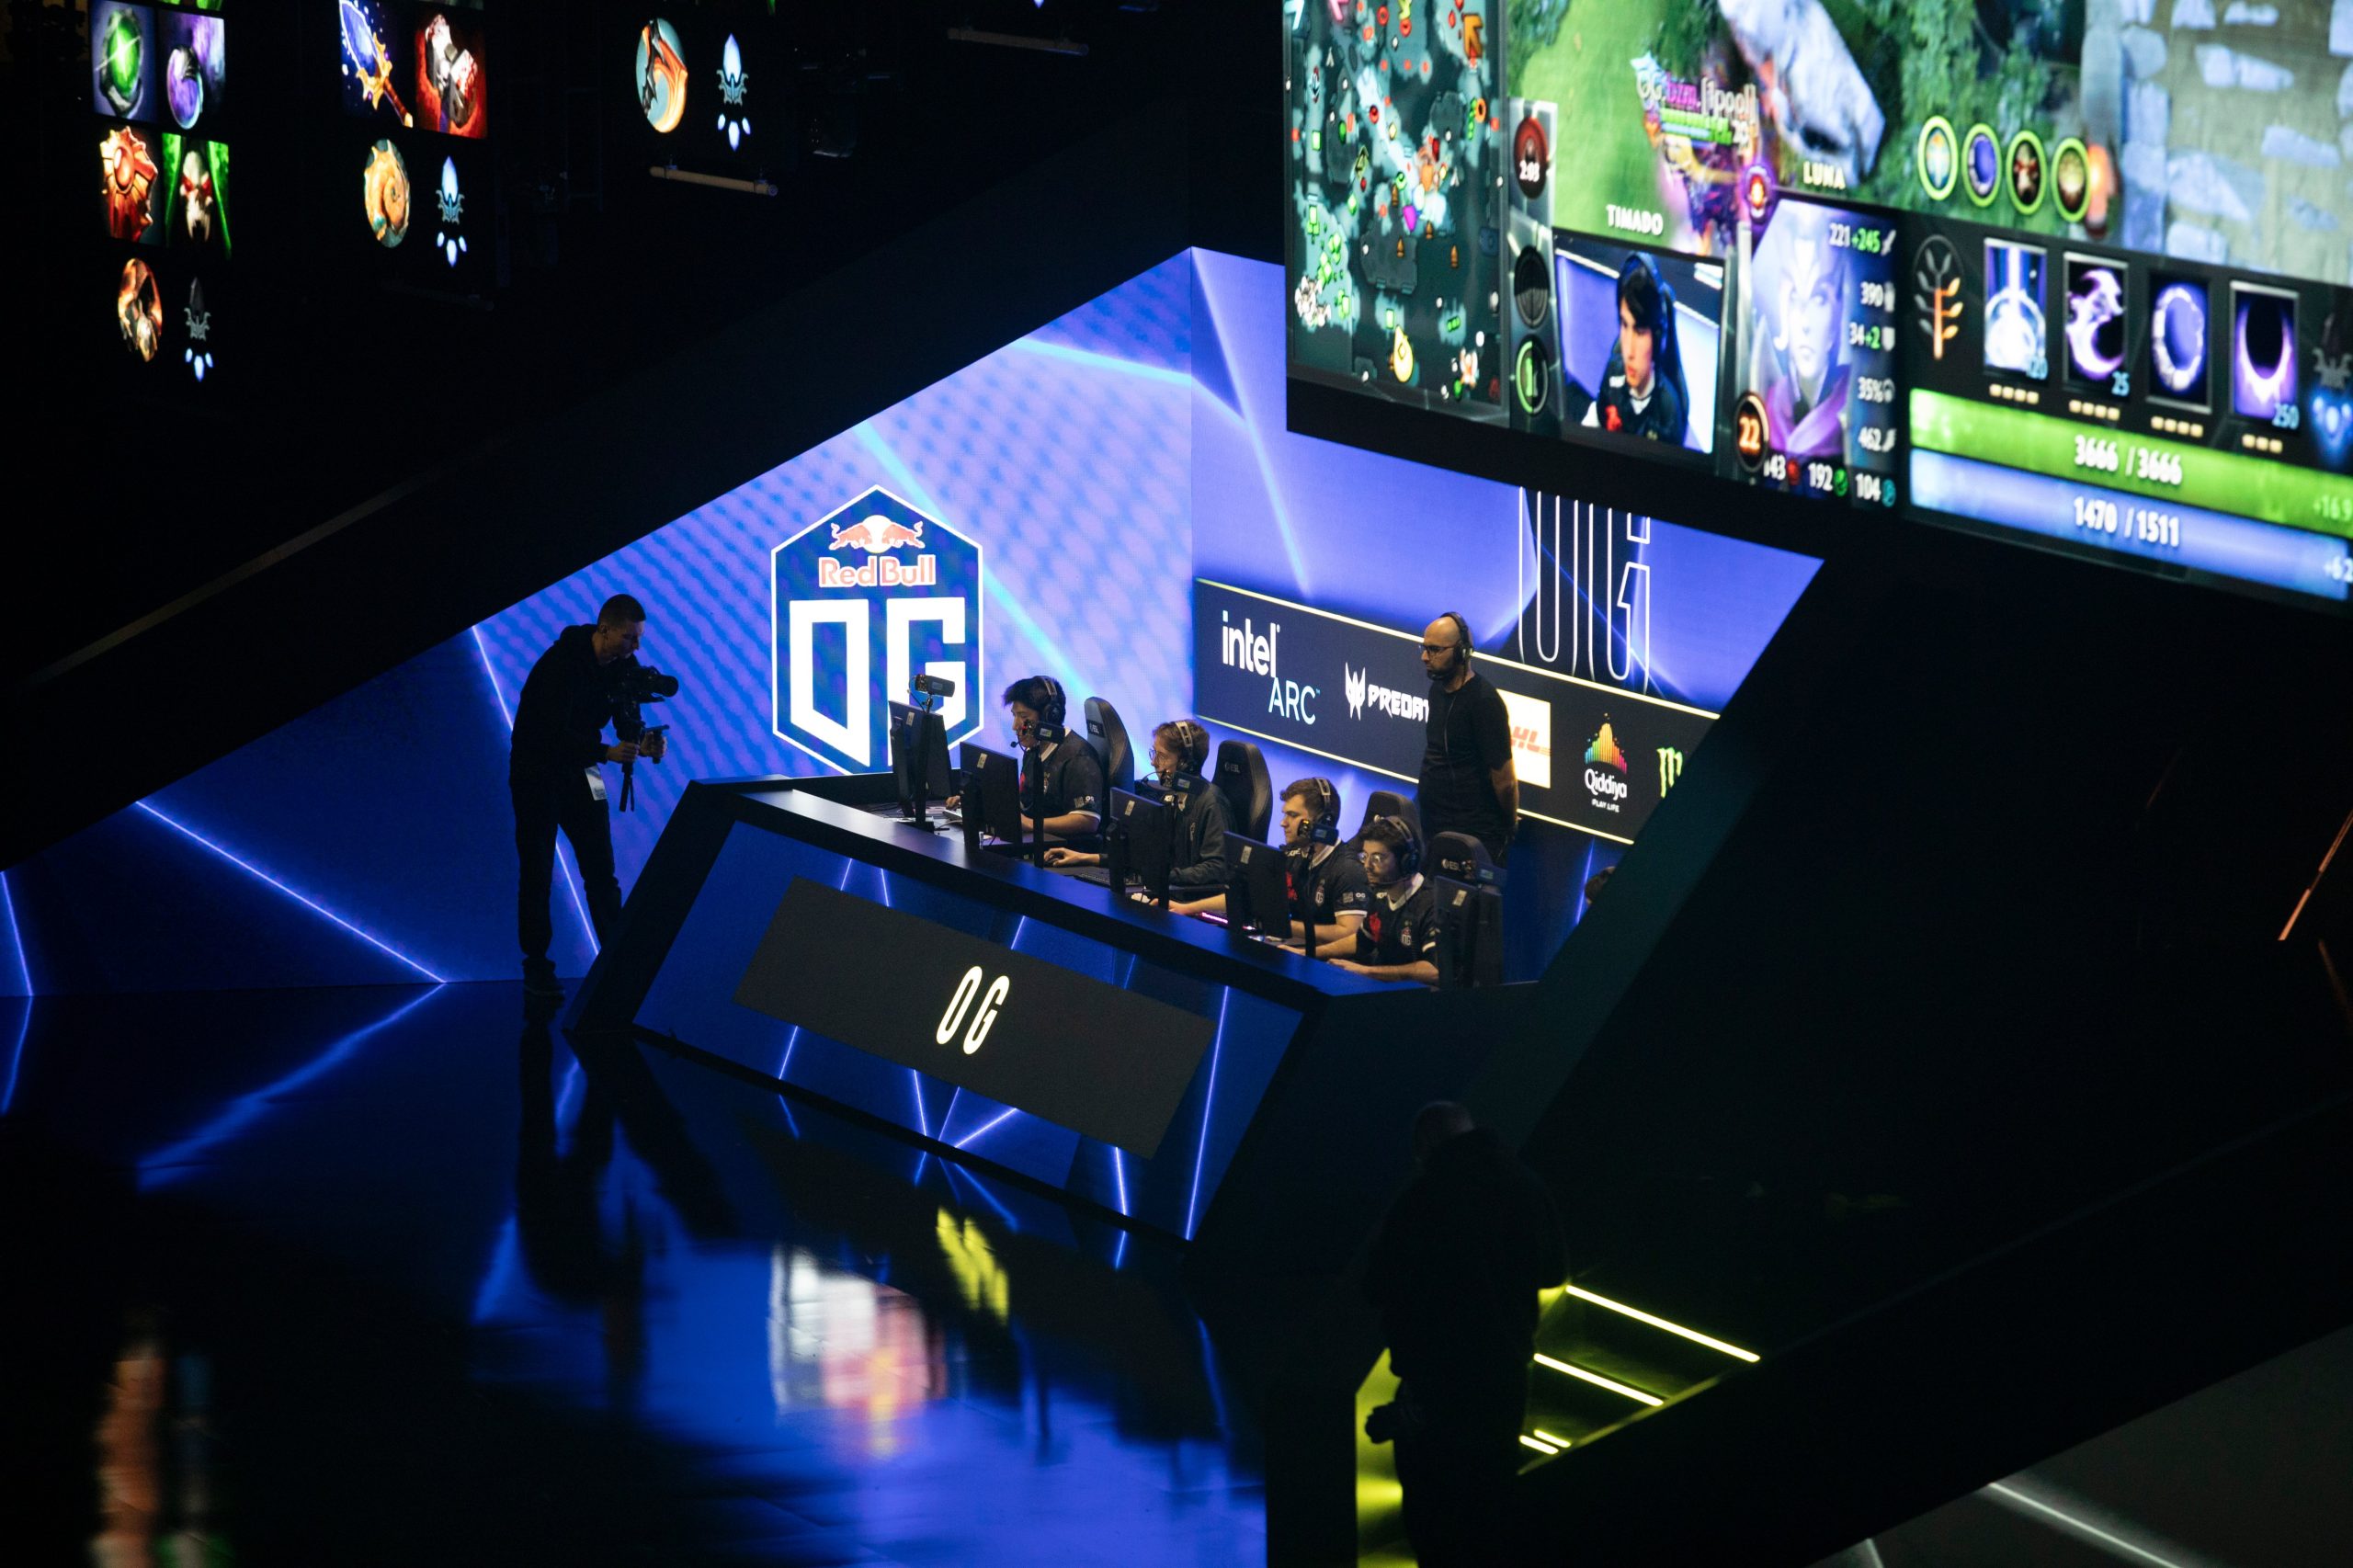 Pro gaming is growing as an industry, with coaches, analysts and content creators surrounding the players themselves